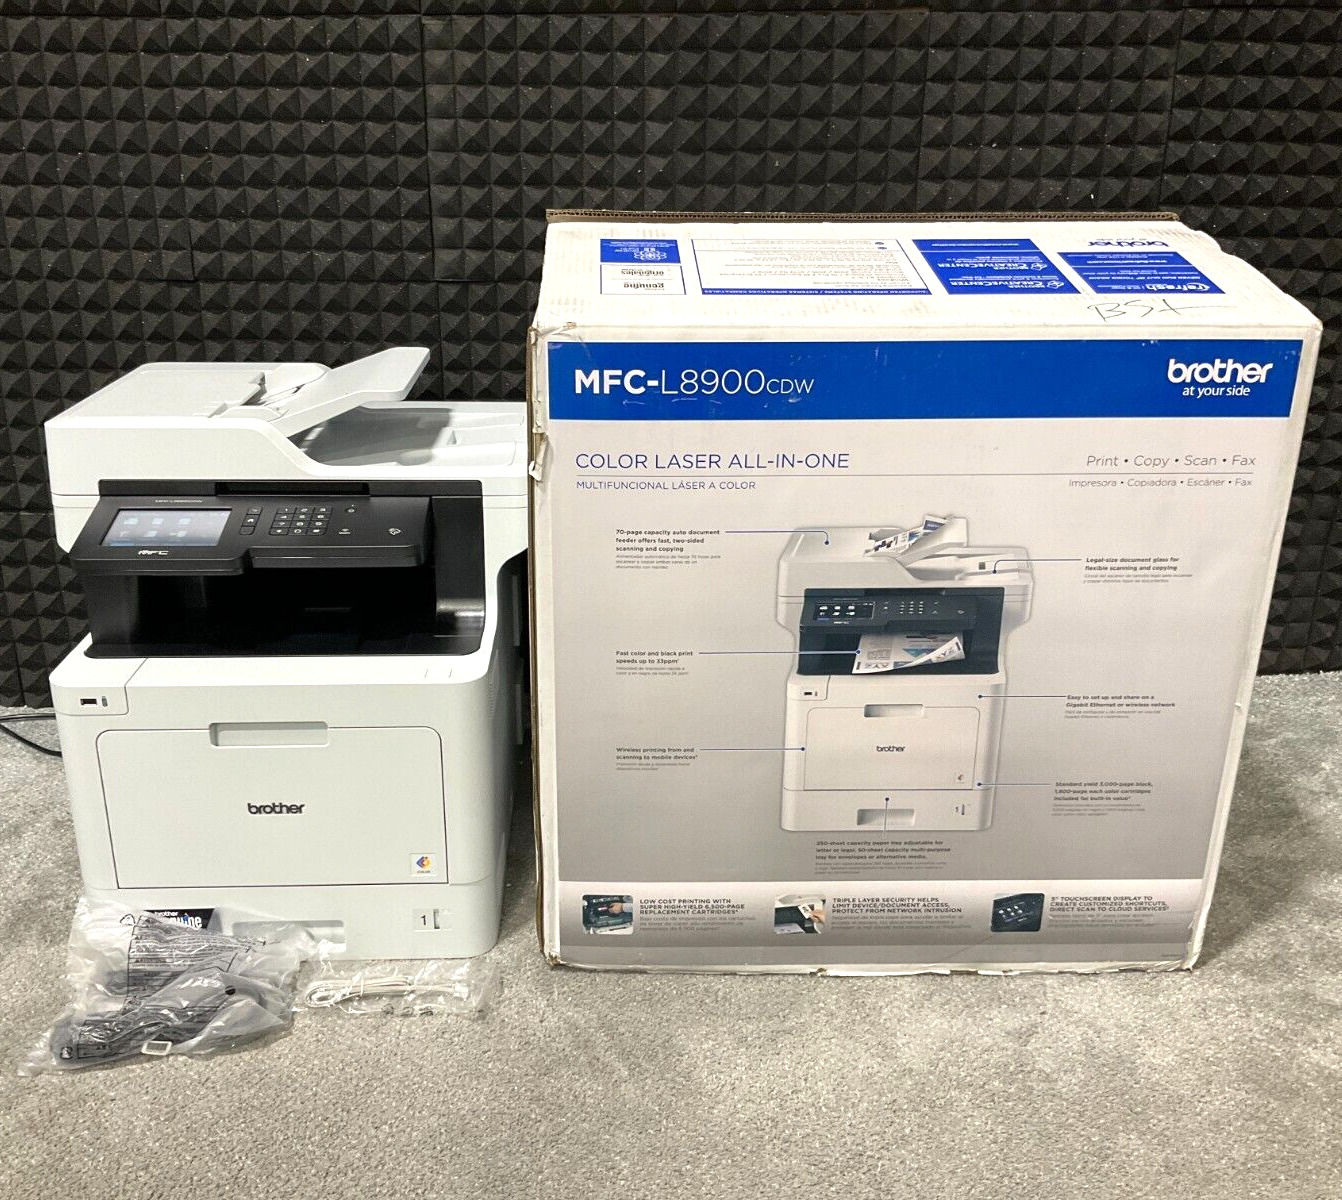 Brother MFC-L8900CDW Wireless Color Laser Printer Copier Scanner Fax MFCL8900CDW